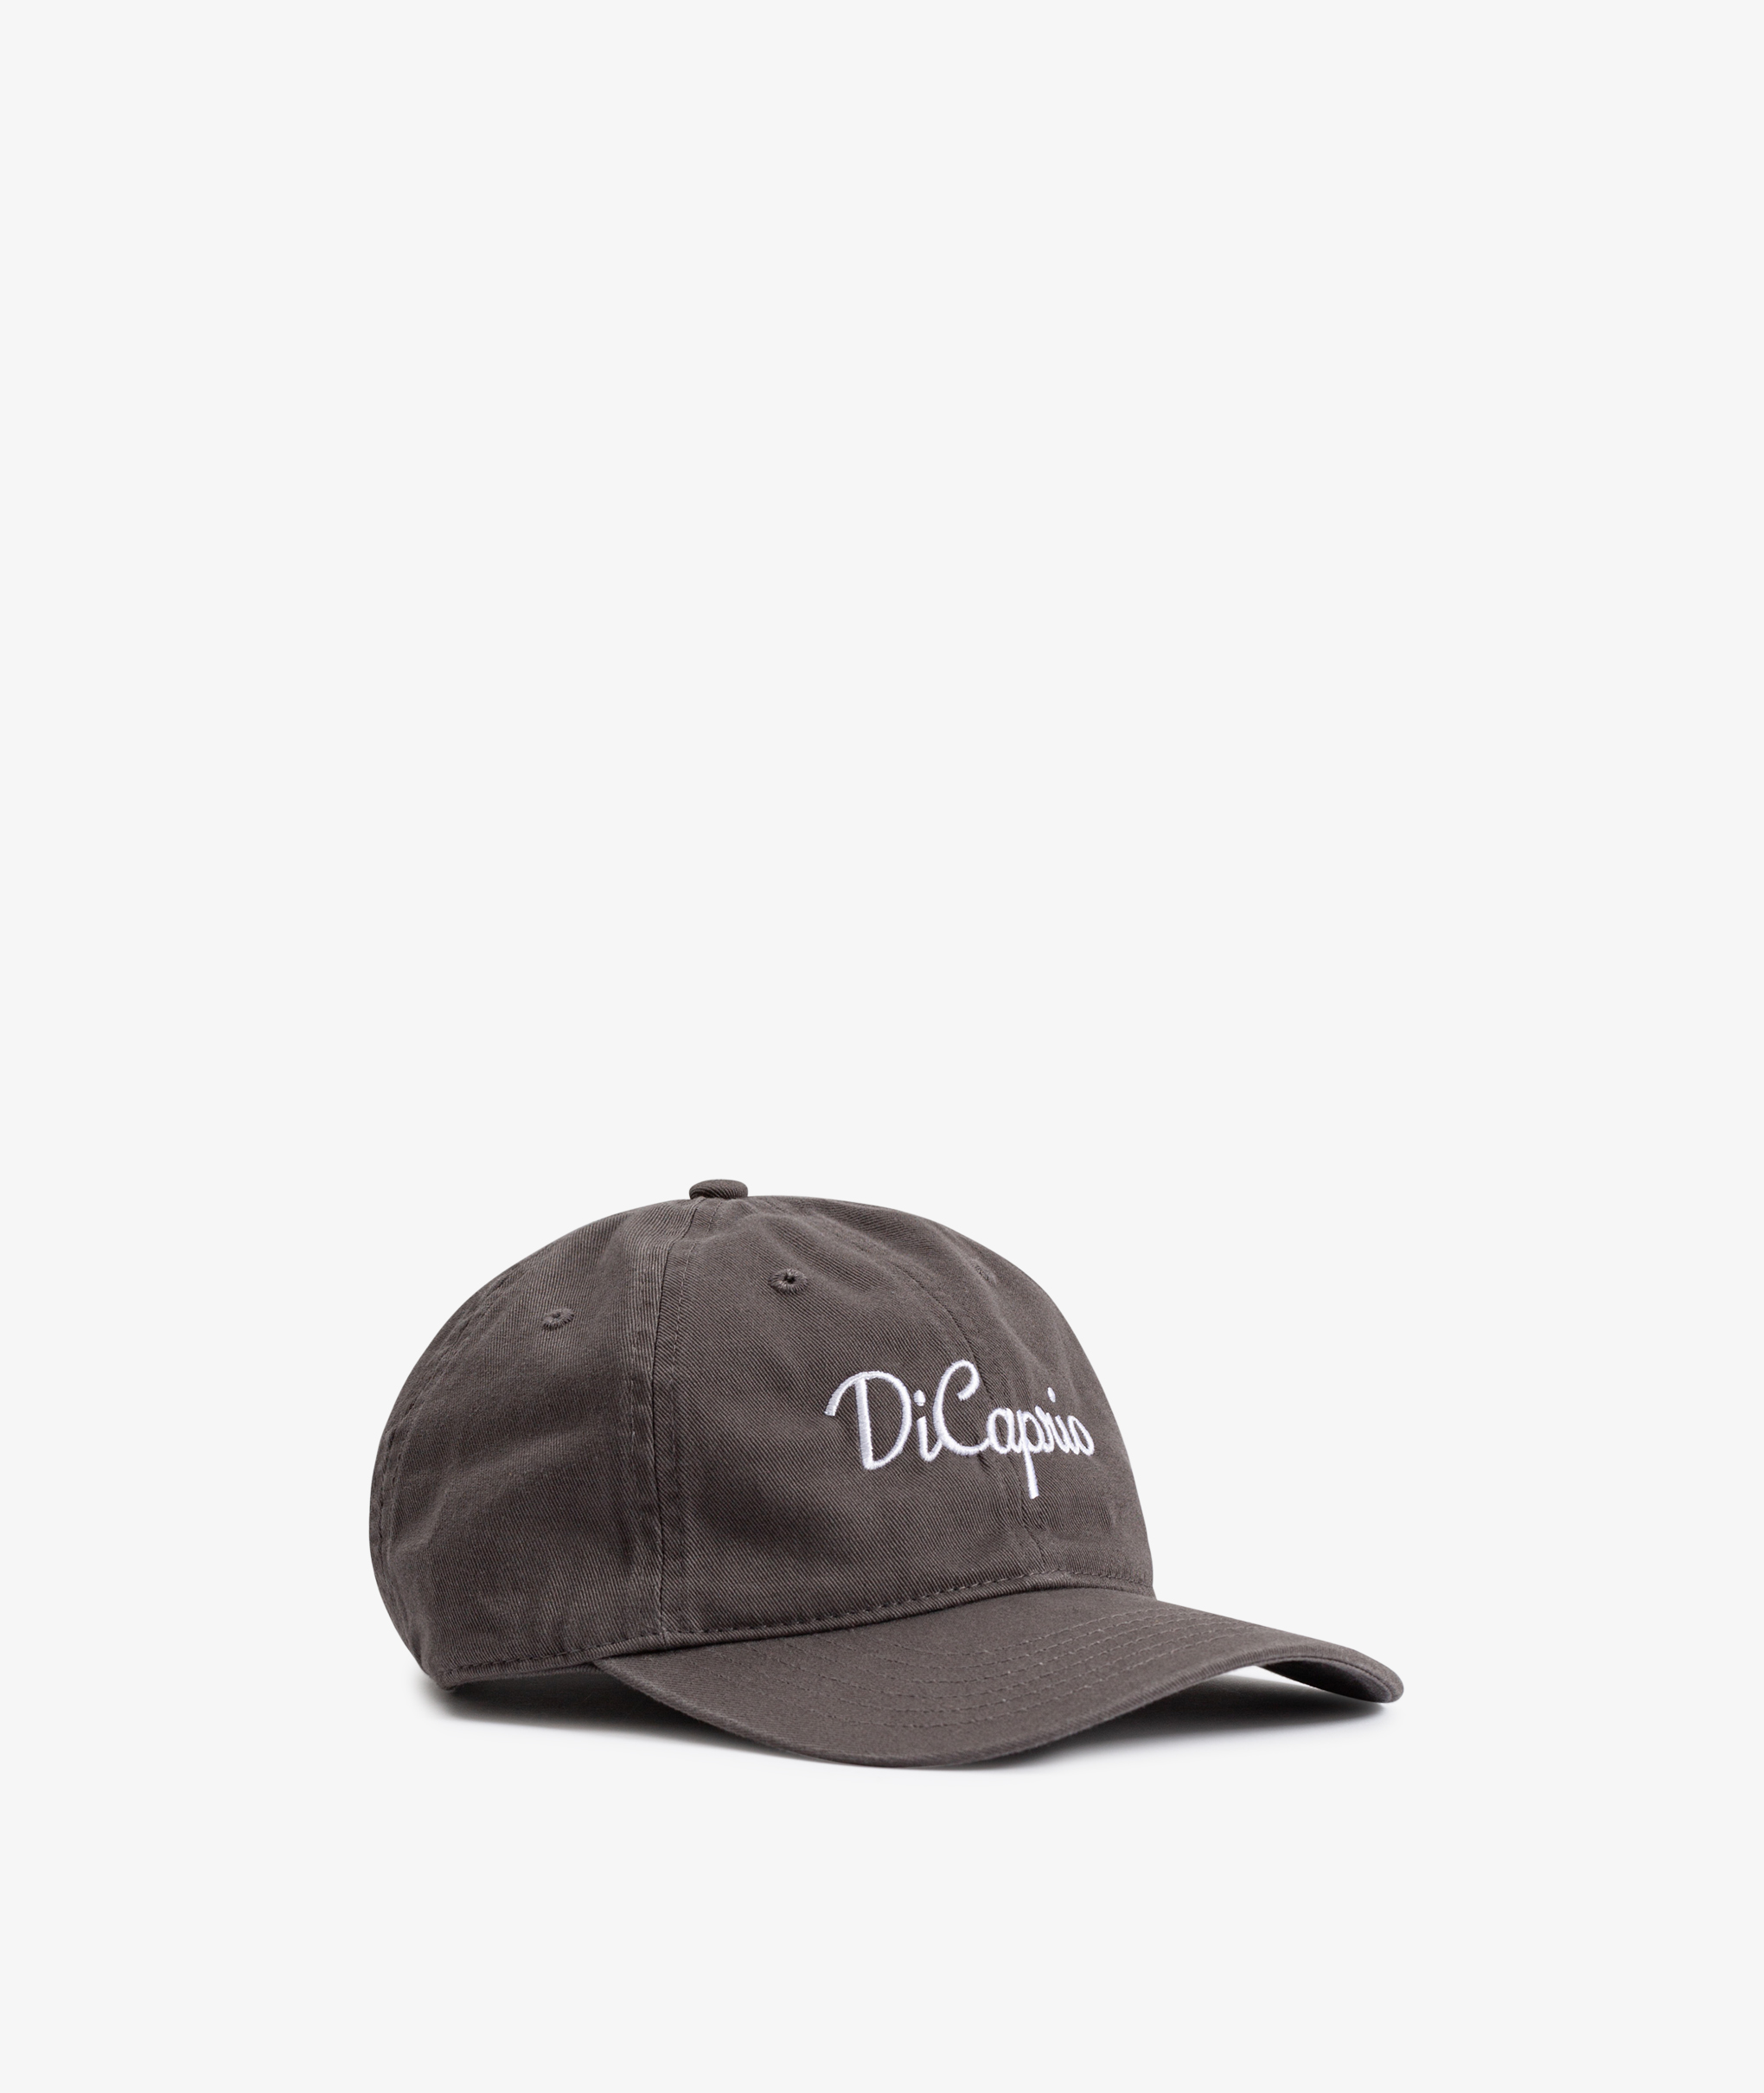 Norse Store | Shipping Worldwide - IDEA Dicaprio Cap - Charcoal